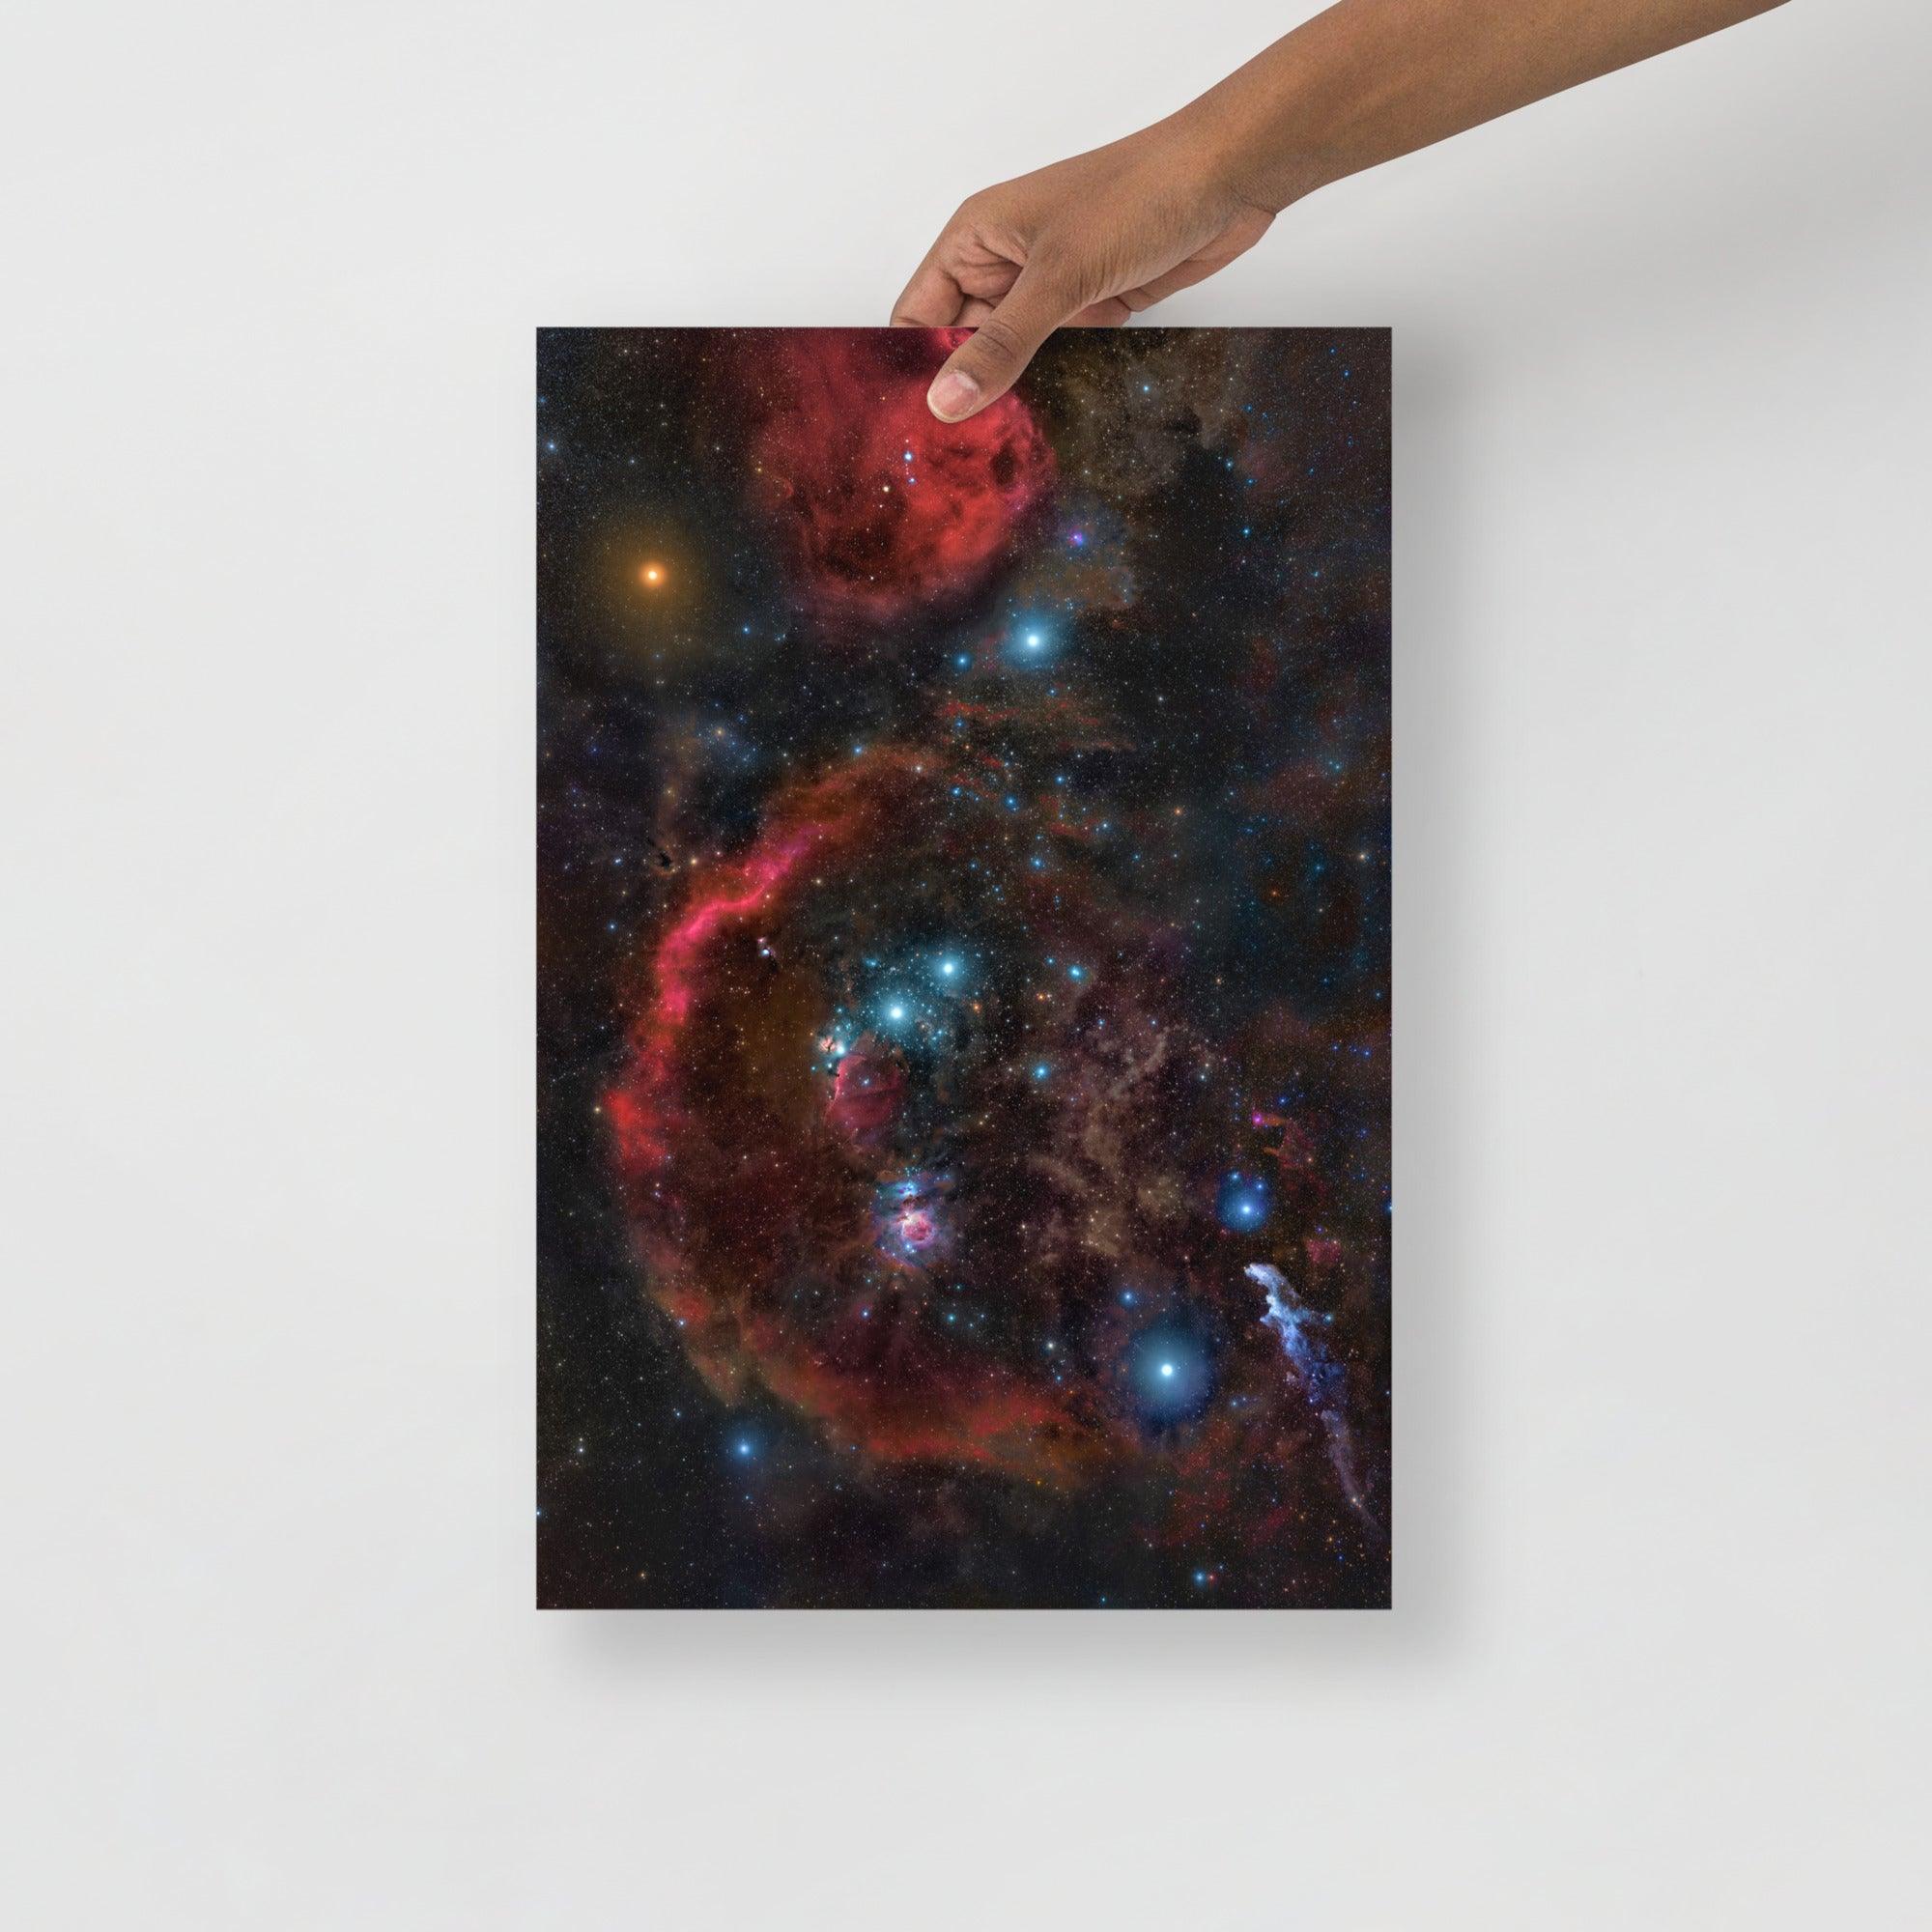 An Orion Constellation poster on a plain backdrop in size 12x18”.